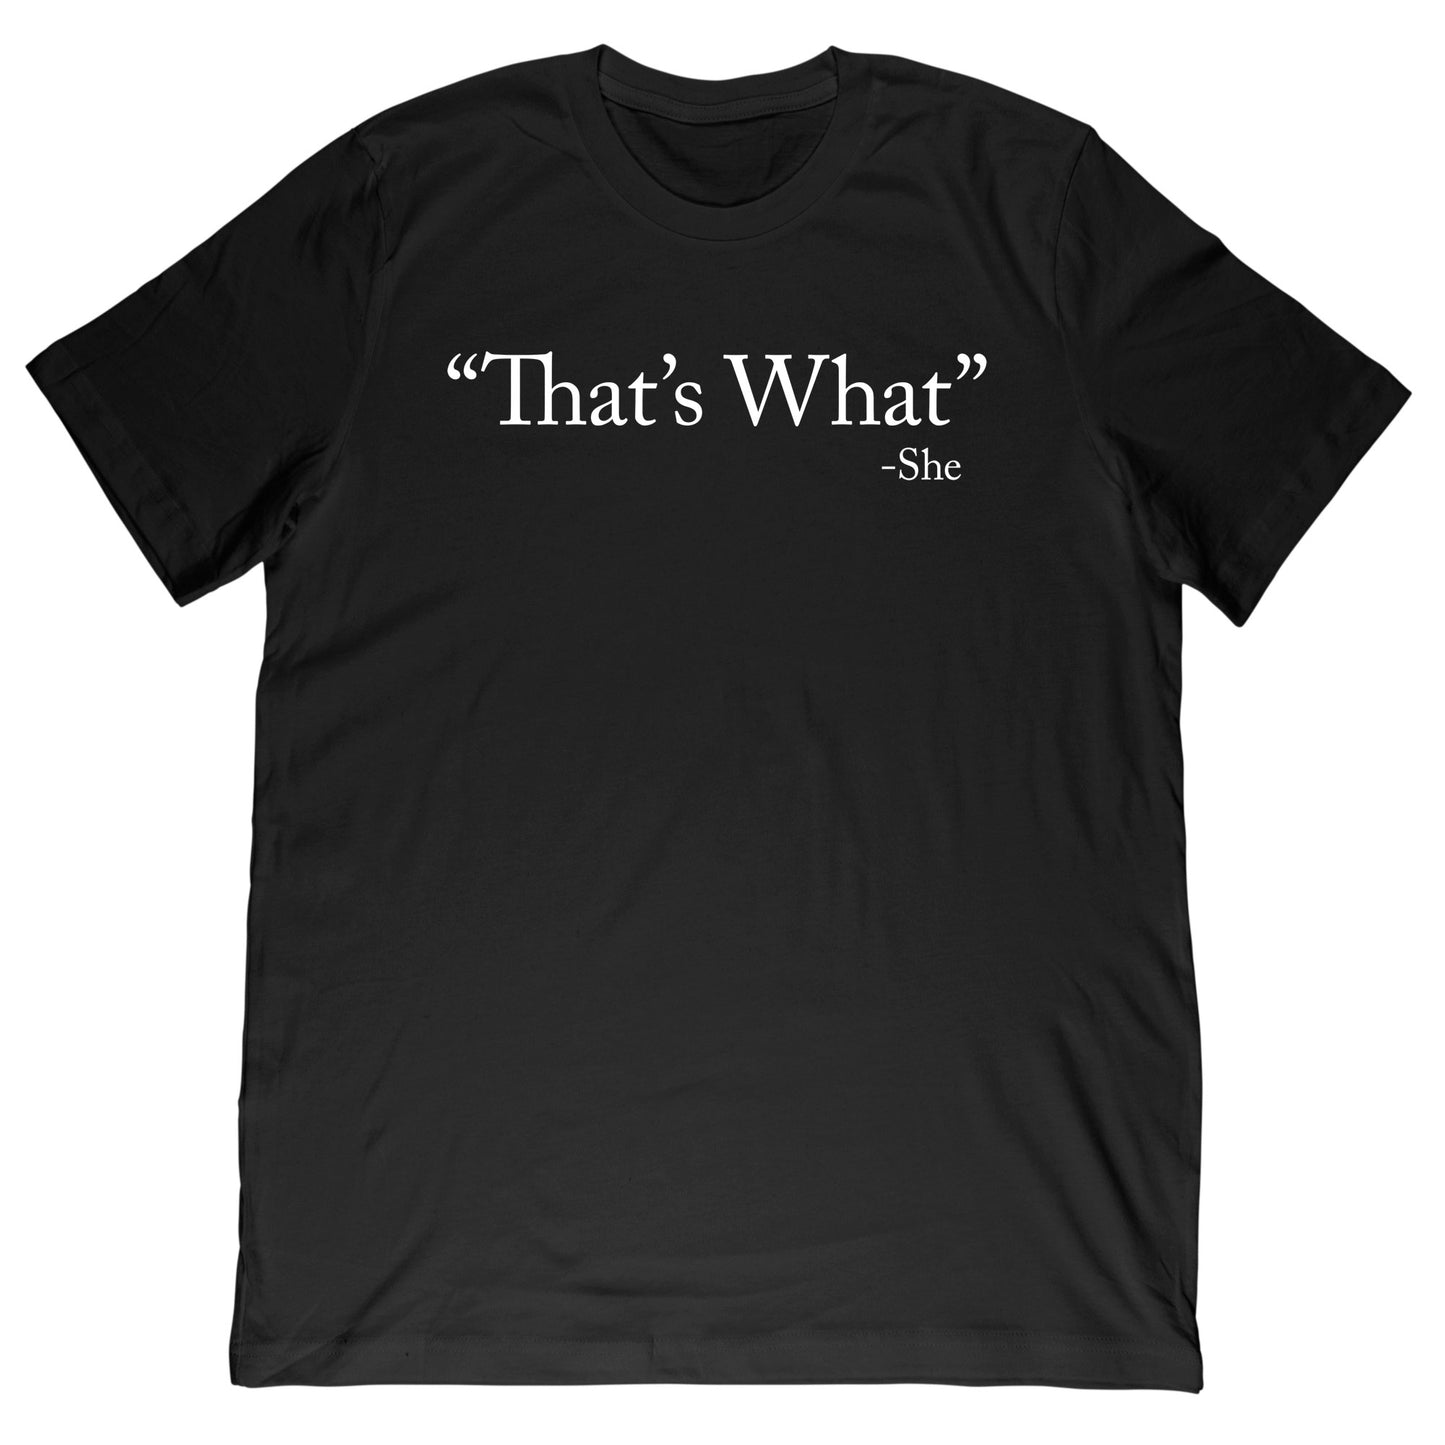 That’s What T-Shirt